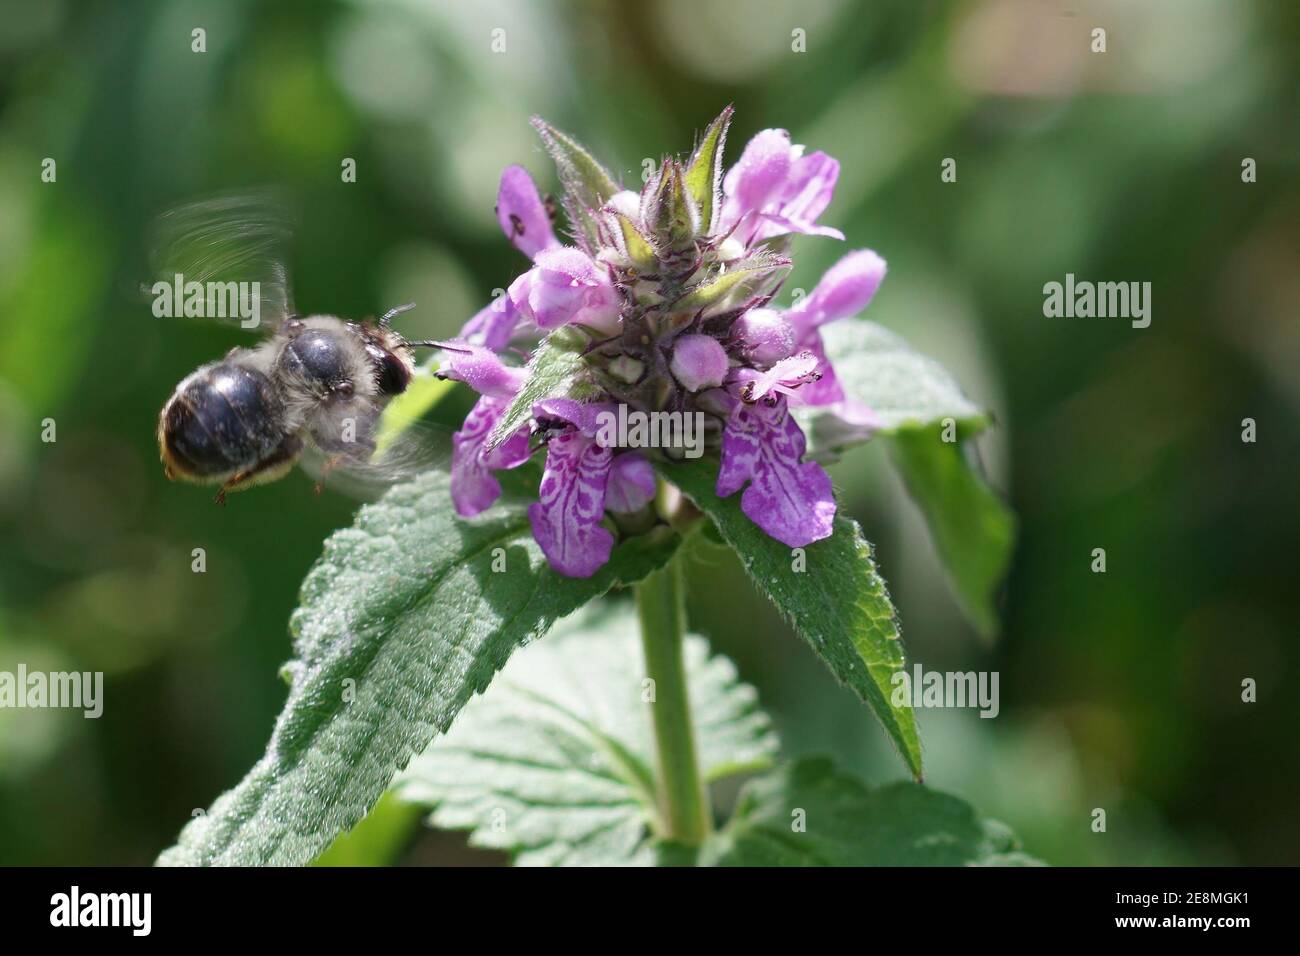 A Tailed Flower Bee, Anthophora furcata, approaching one of her hostplants, Hedgenettles or Stachys. Stock Photo